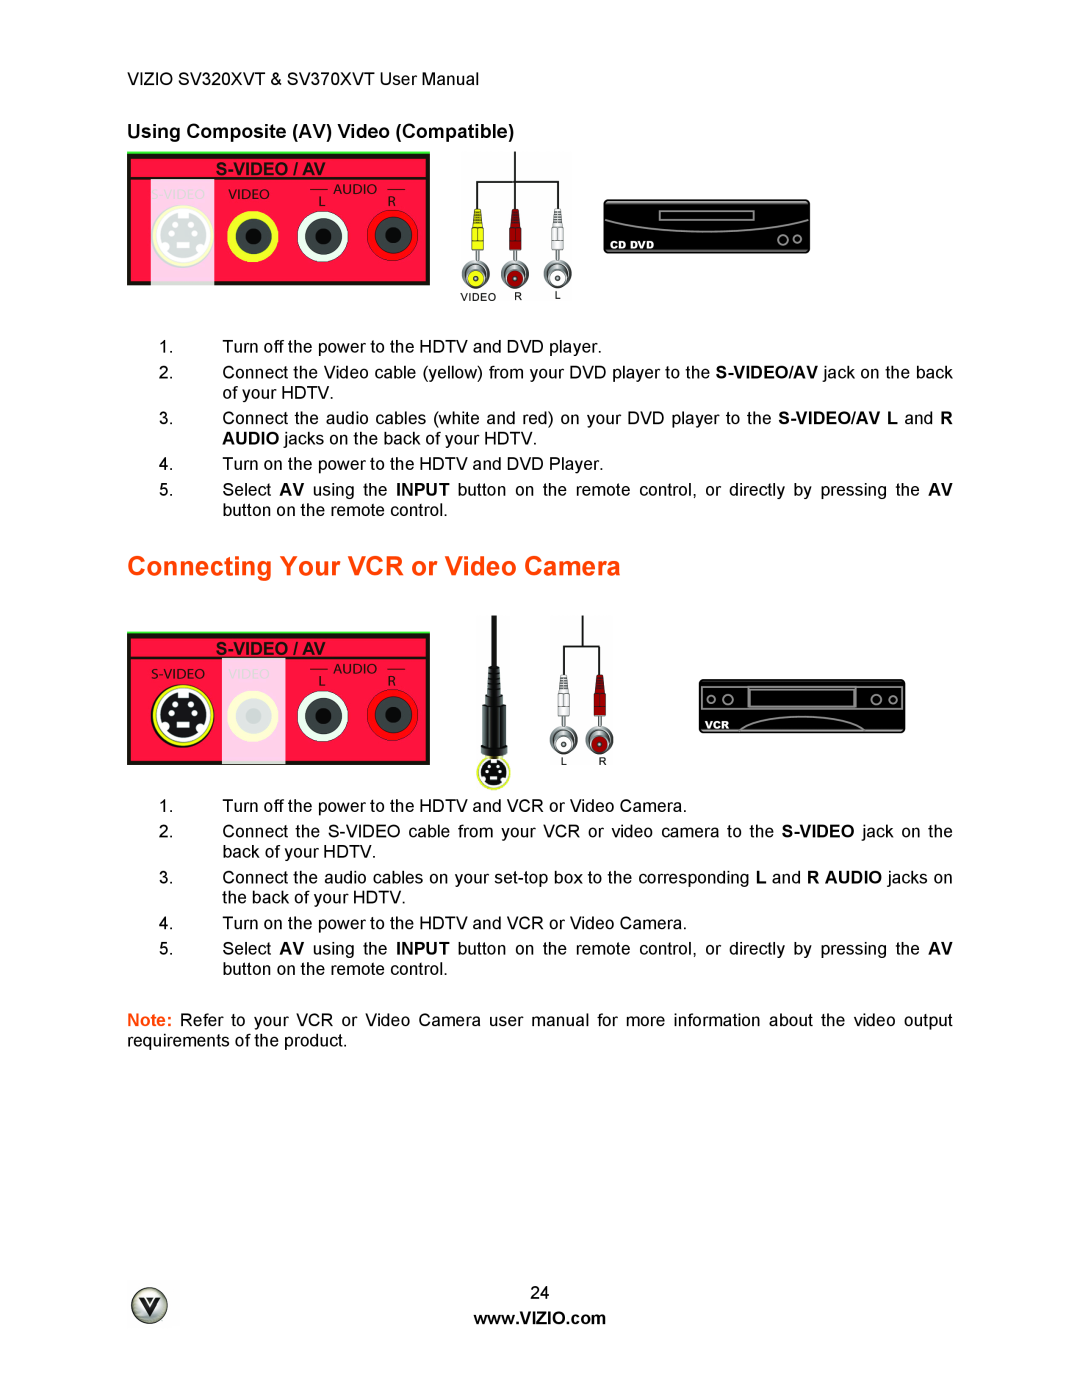 Vizio SV320XVT, SV370XVT user manual Connecting Your VCR or Video Camera, Using Composite AV Video Compatible 